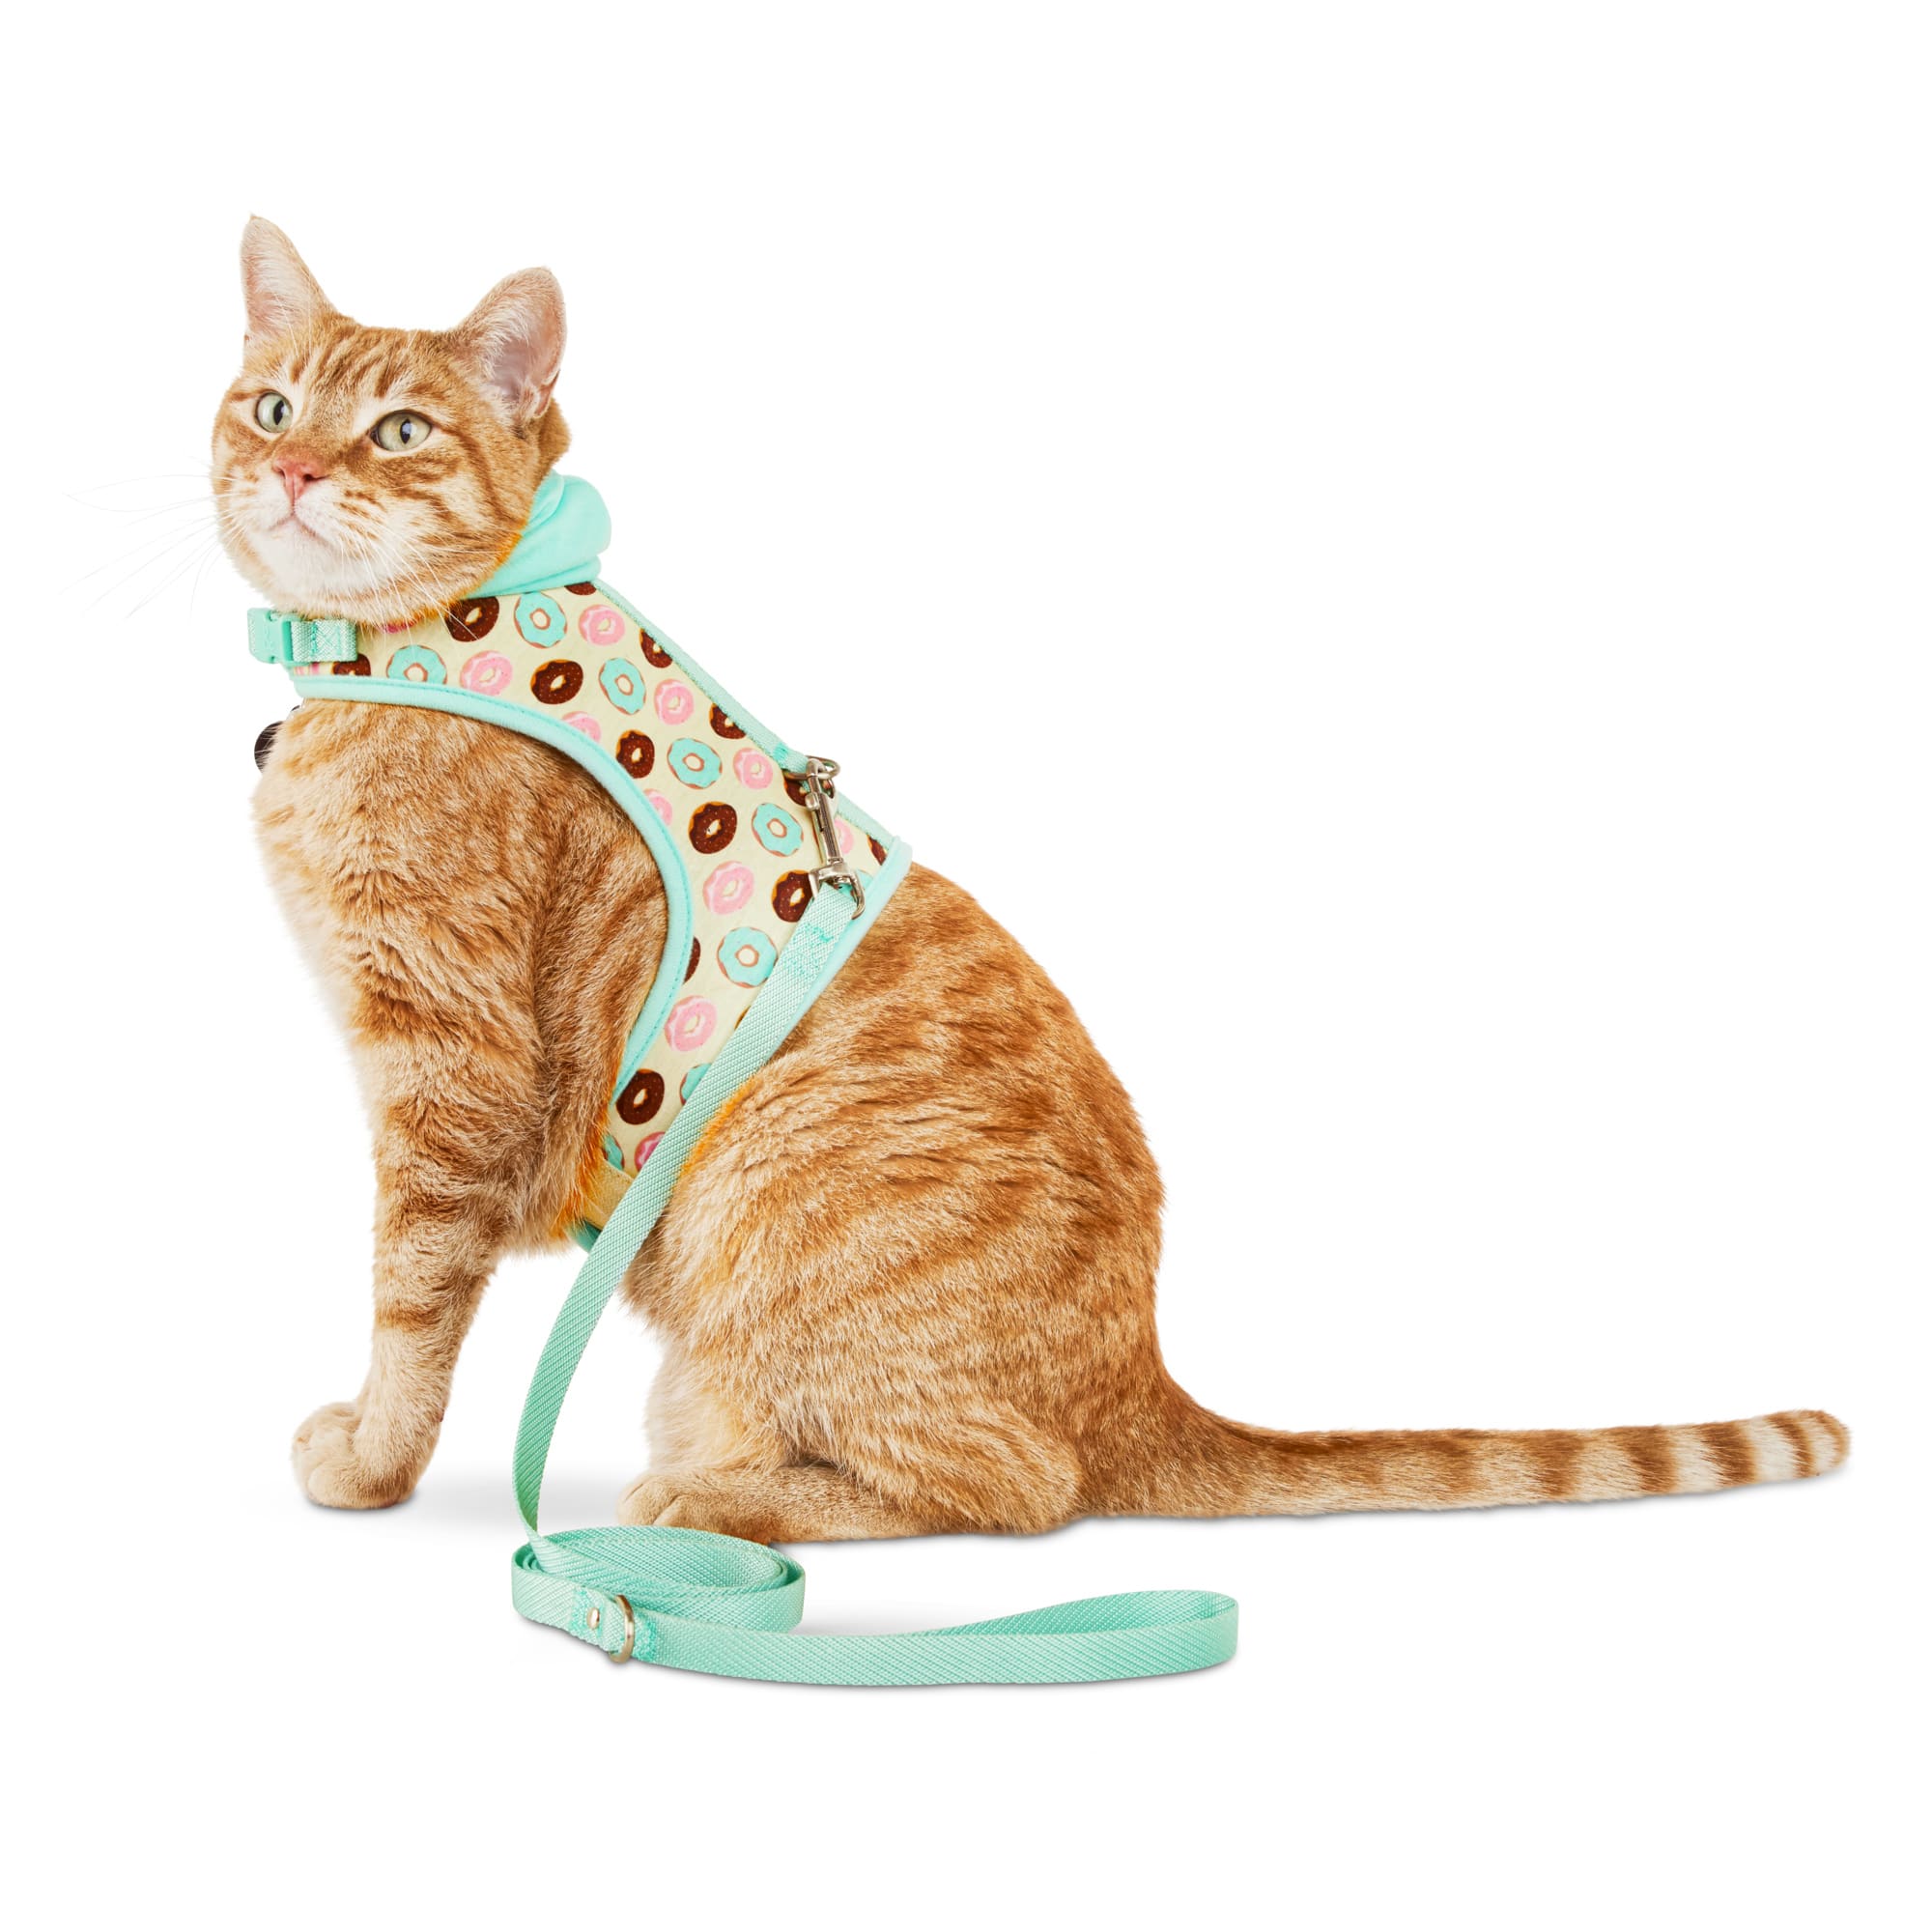 bond and co cat harness